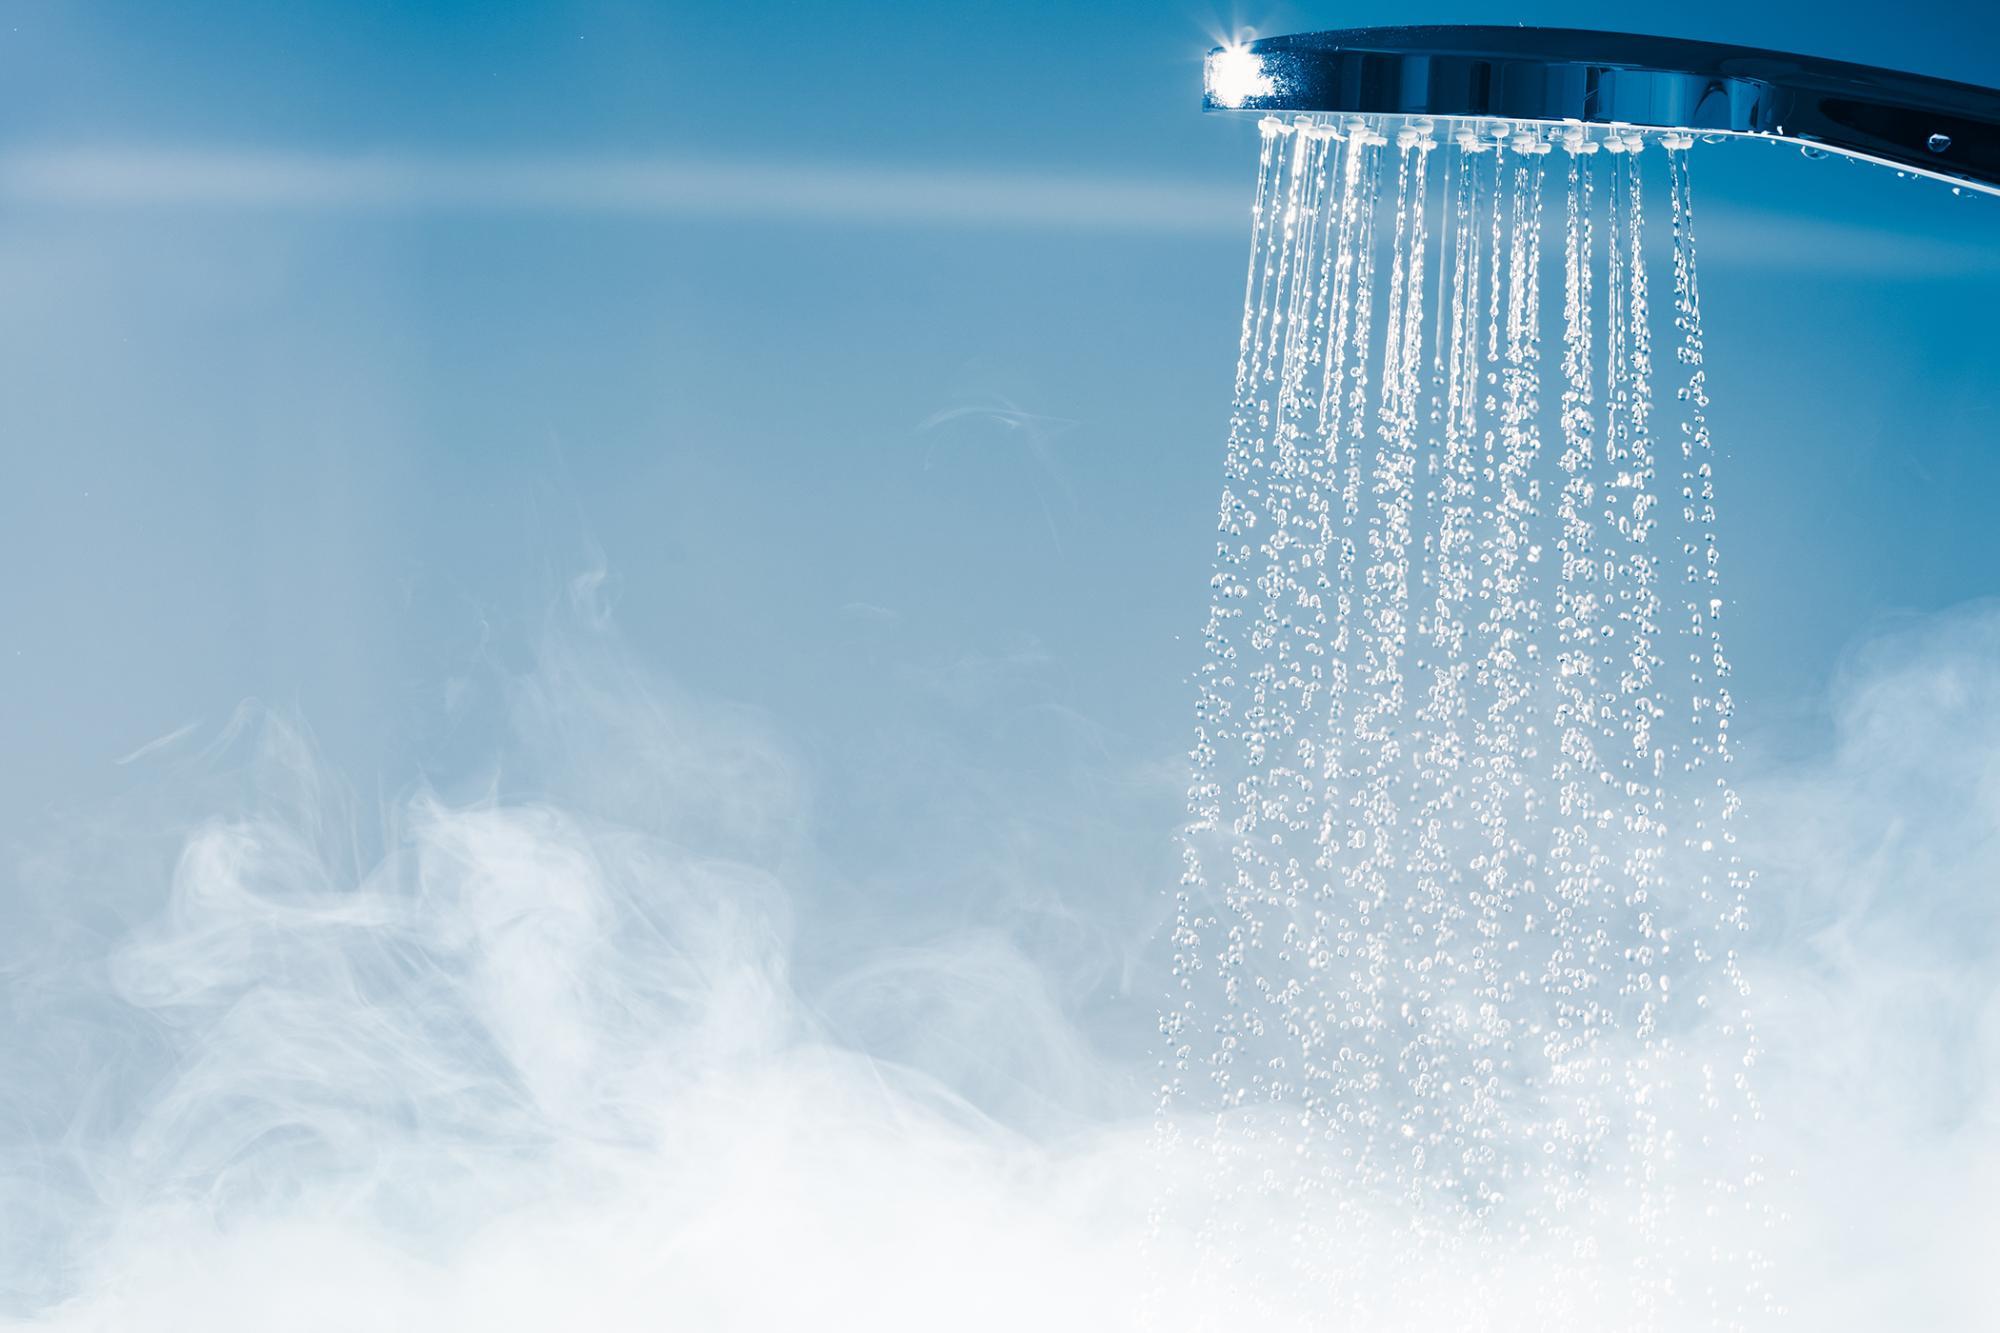 Hot water coming out of a shower head with steam at the bottom flowing up